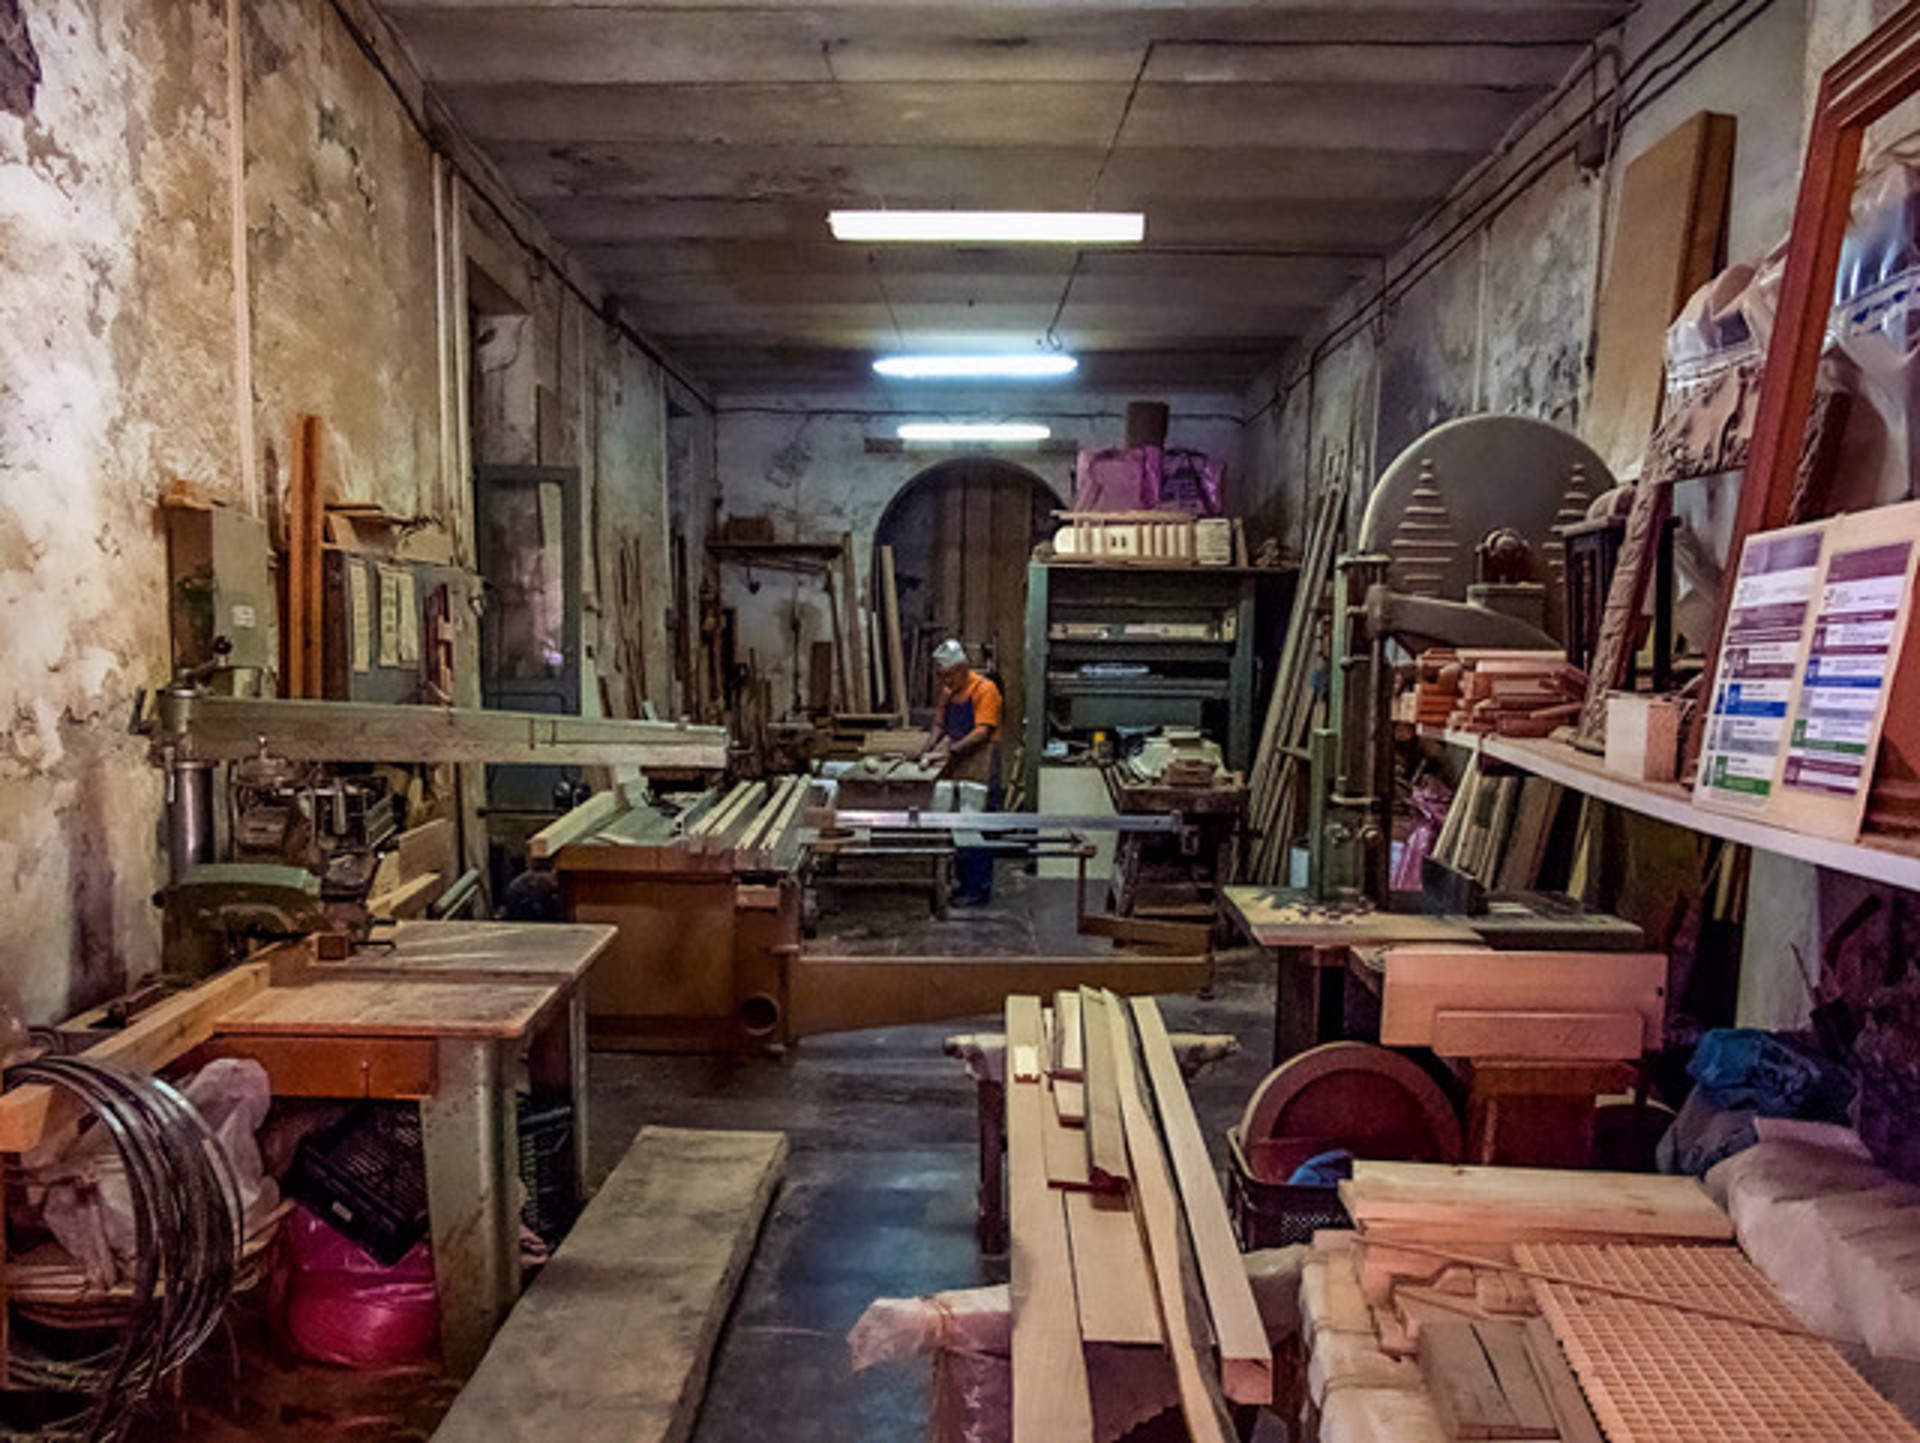 Wood Repair Shop, Florence, Italy by Lawrence McFarland